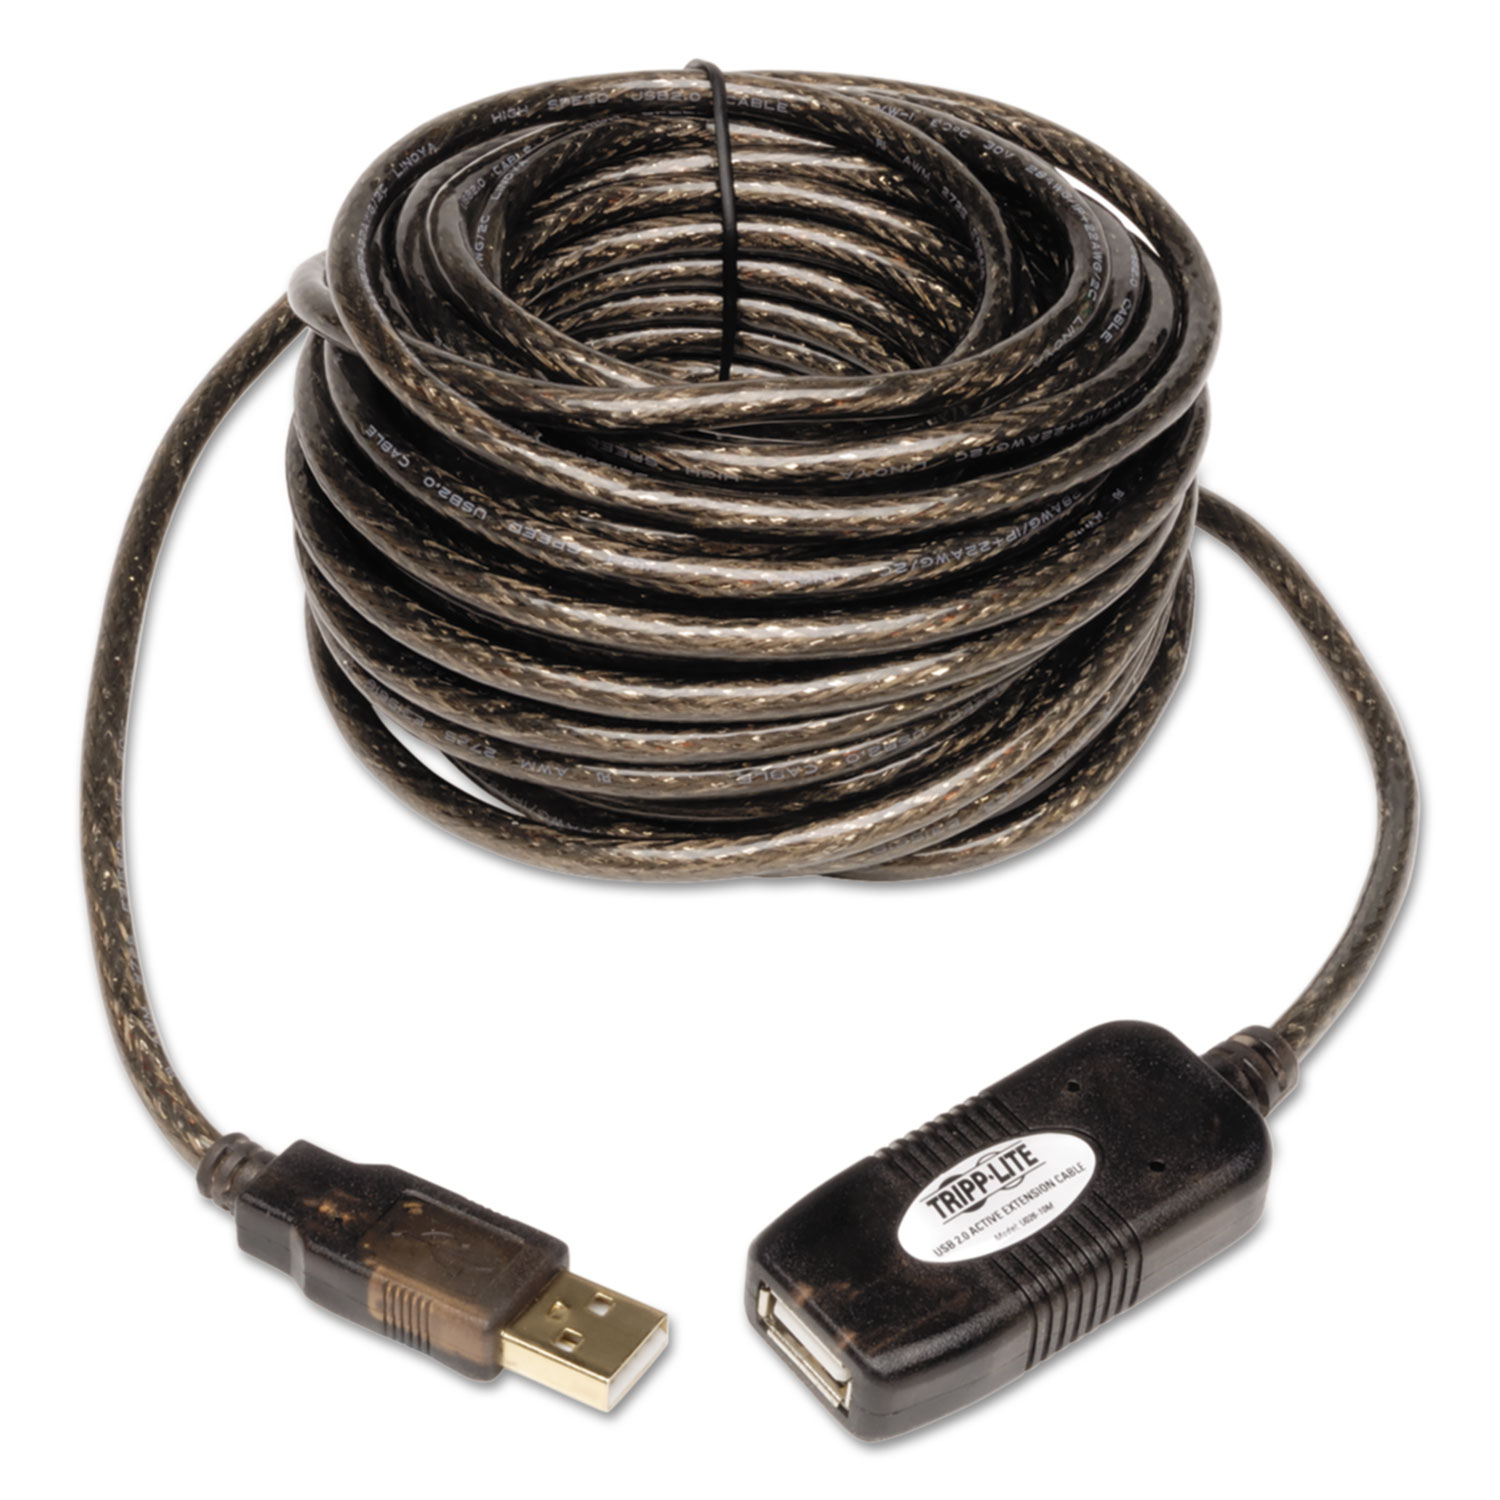  Tripp Lite U026-016 USB 2.0 Active Extension Cable, A to A (M/F), 16 ft., Black (TRPU026016) 